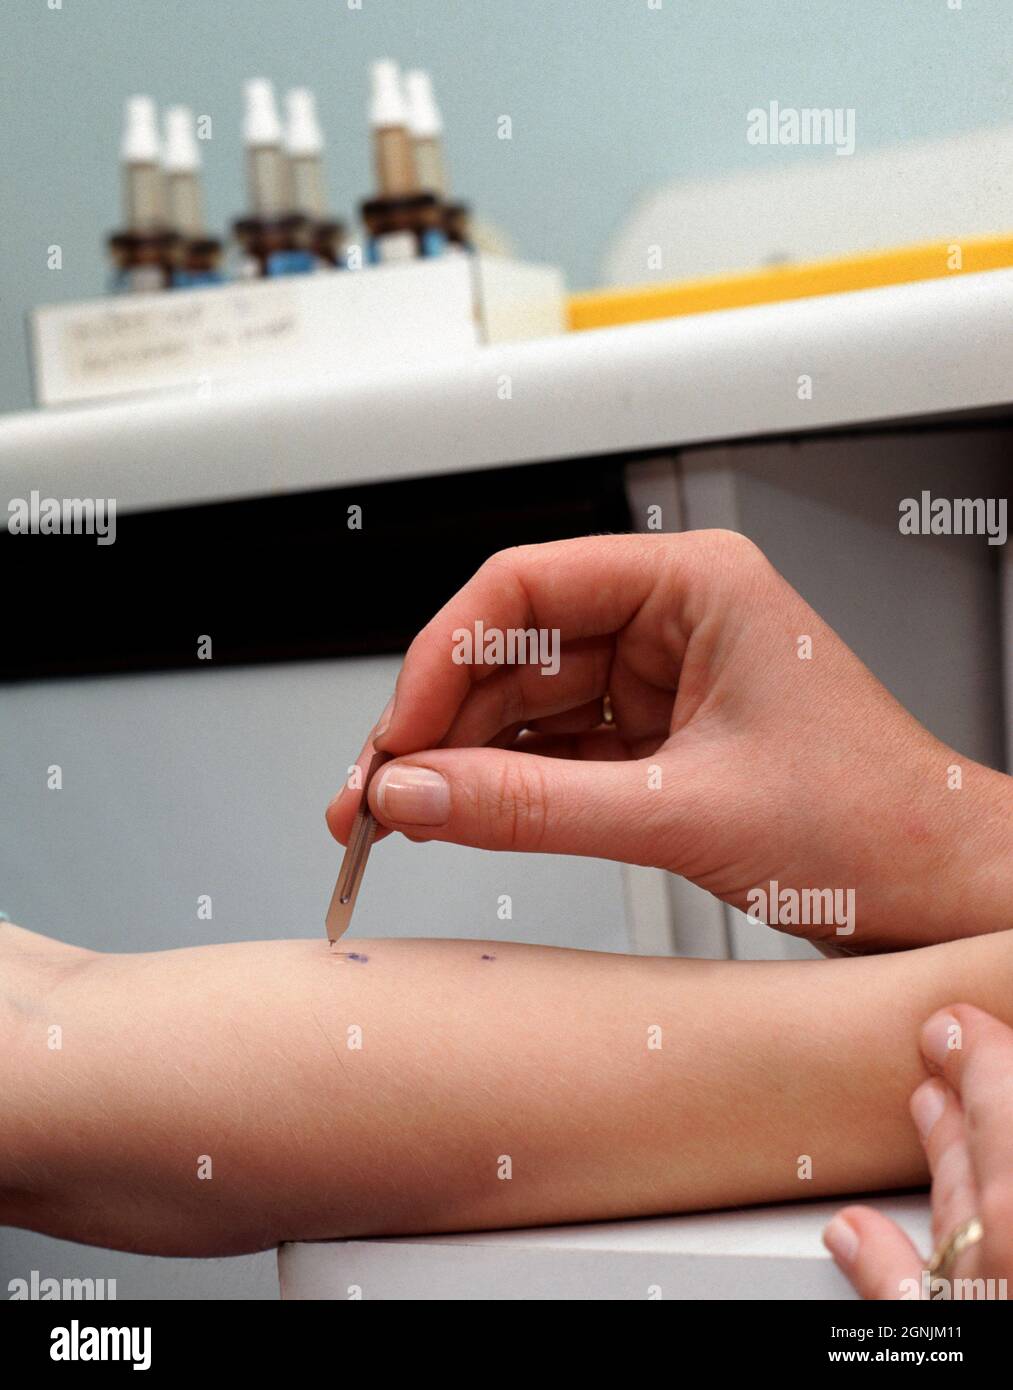 Allergist applies minute amounts of potential allergen extracts to the forearm skin of a young man. Stock Photo